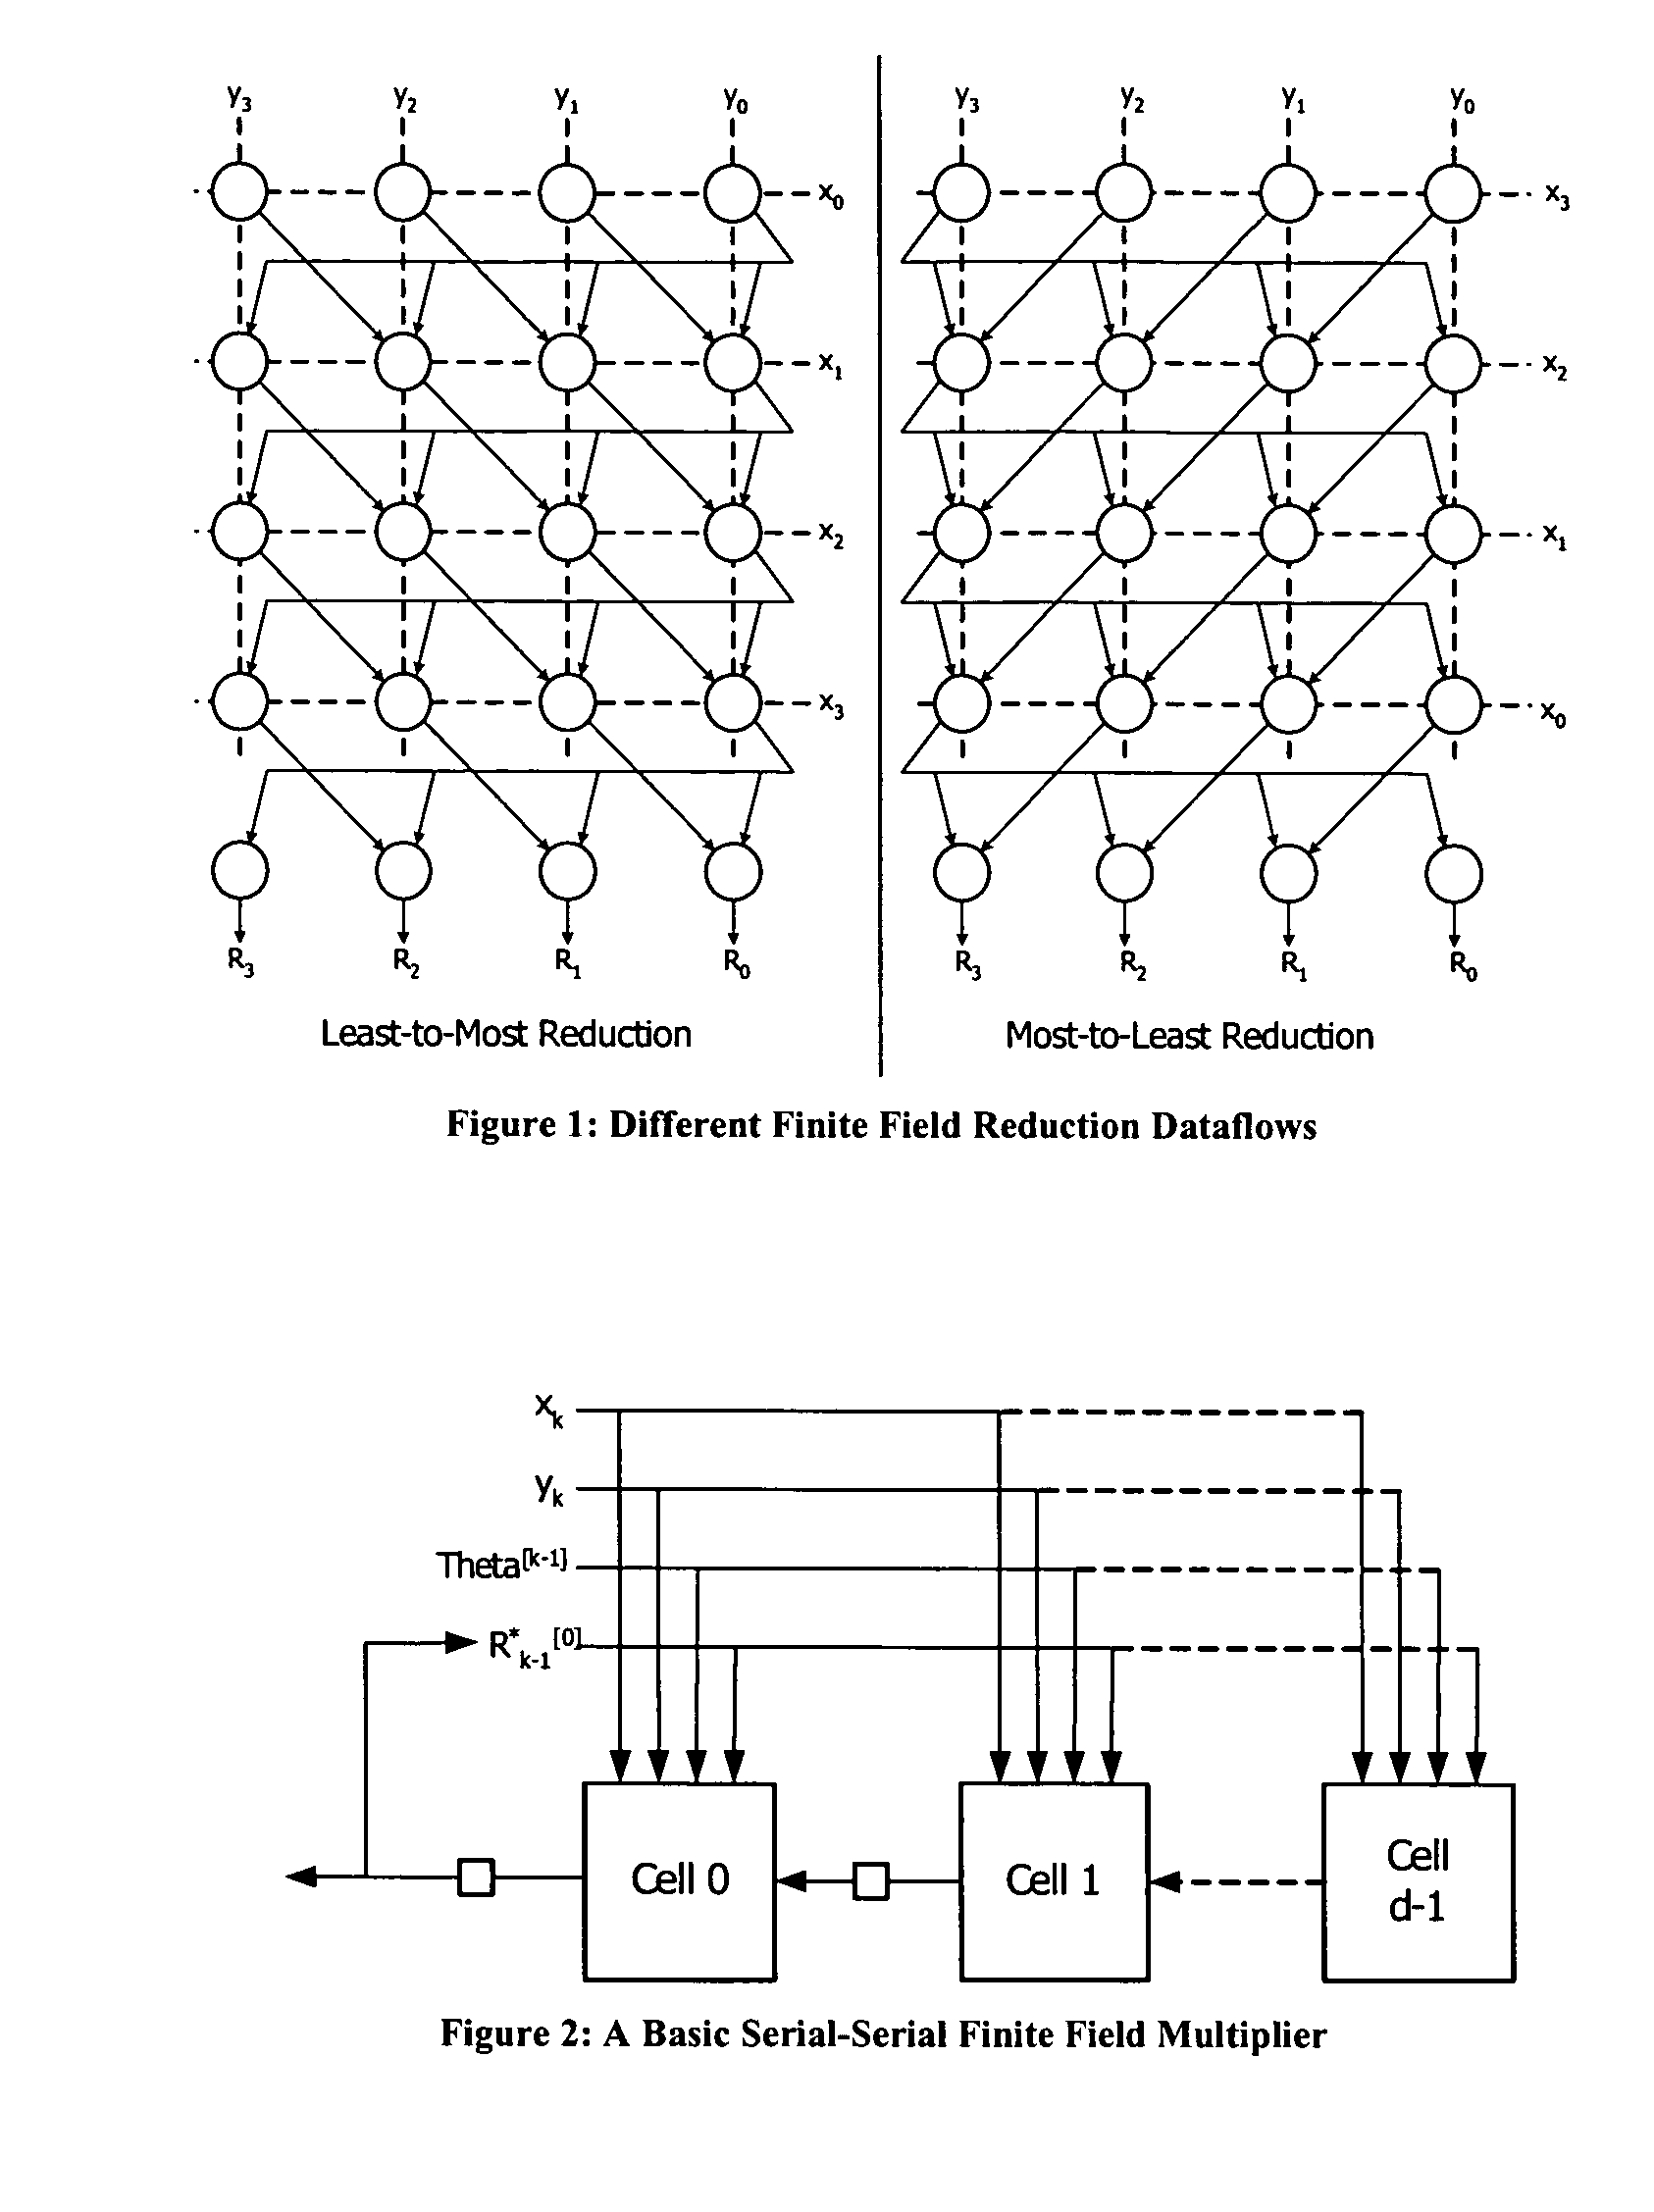 Finite field serial-serial multiplication/reduction structure and method